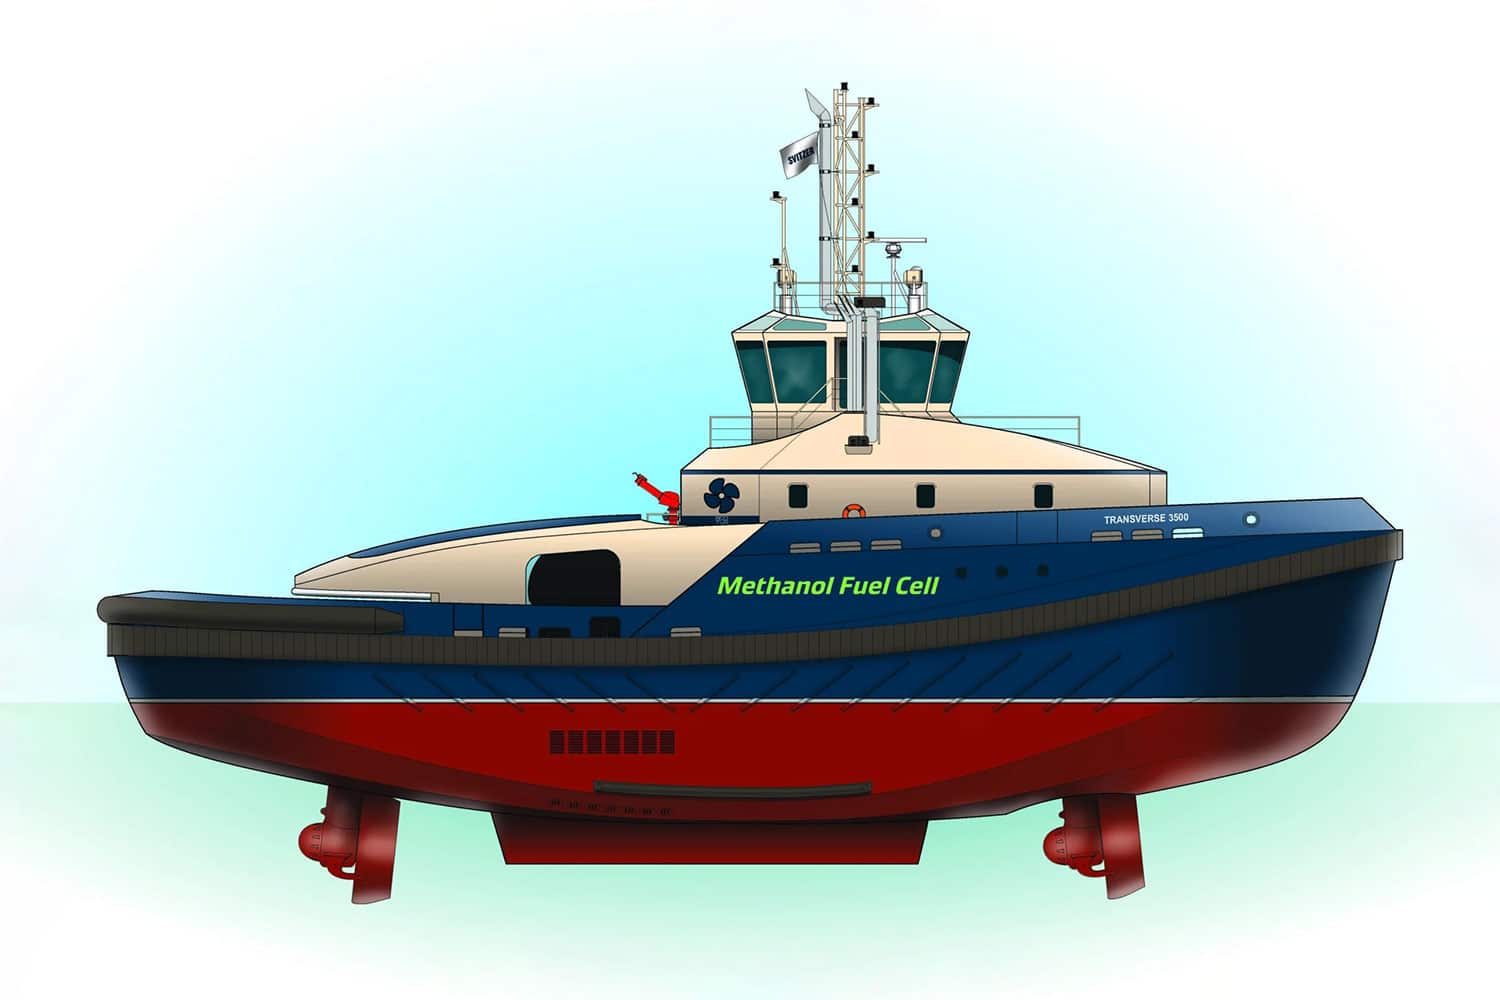 Renderings of the world’s first methanol hybrid fuel cell (MHFC) tug.